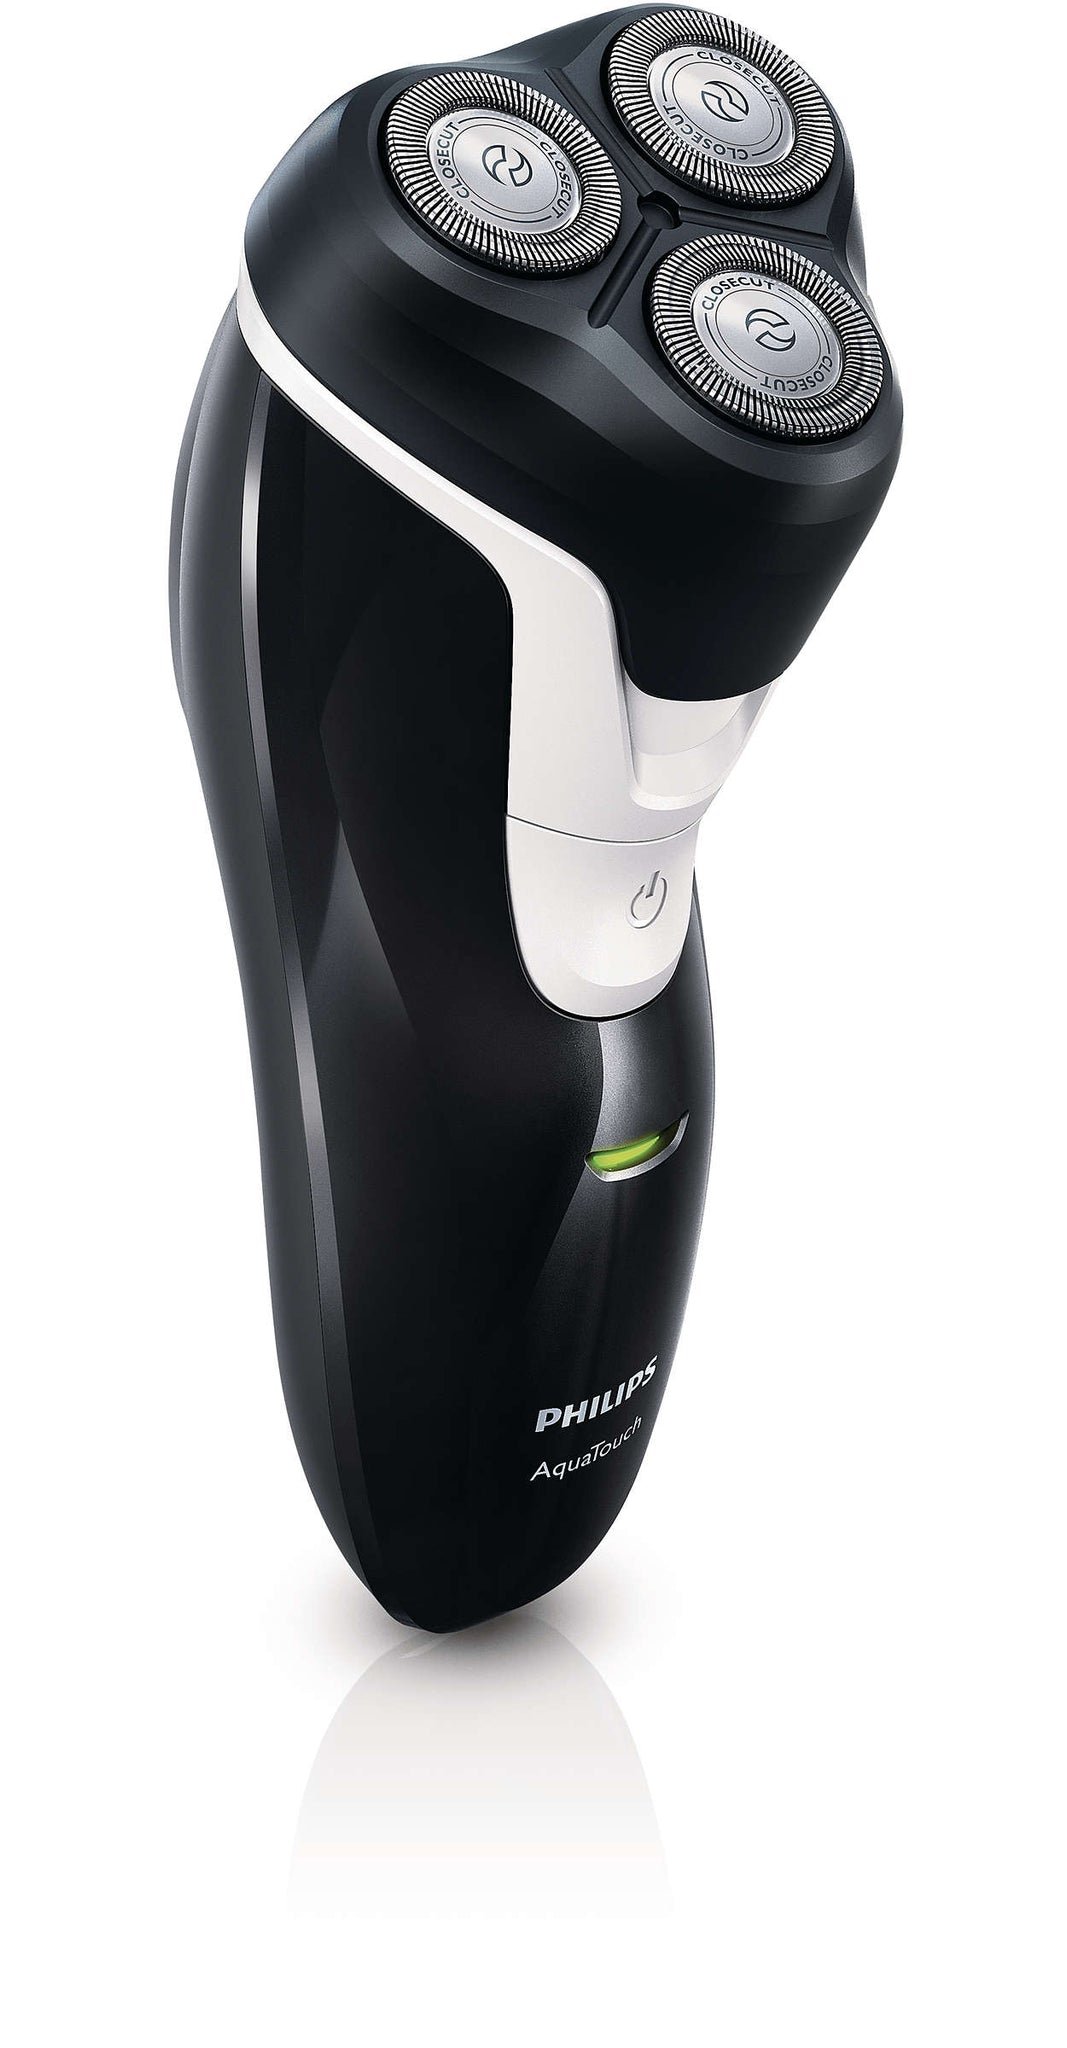 Philips battery powered AquaTouch electric shaver AT610/14